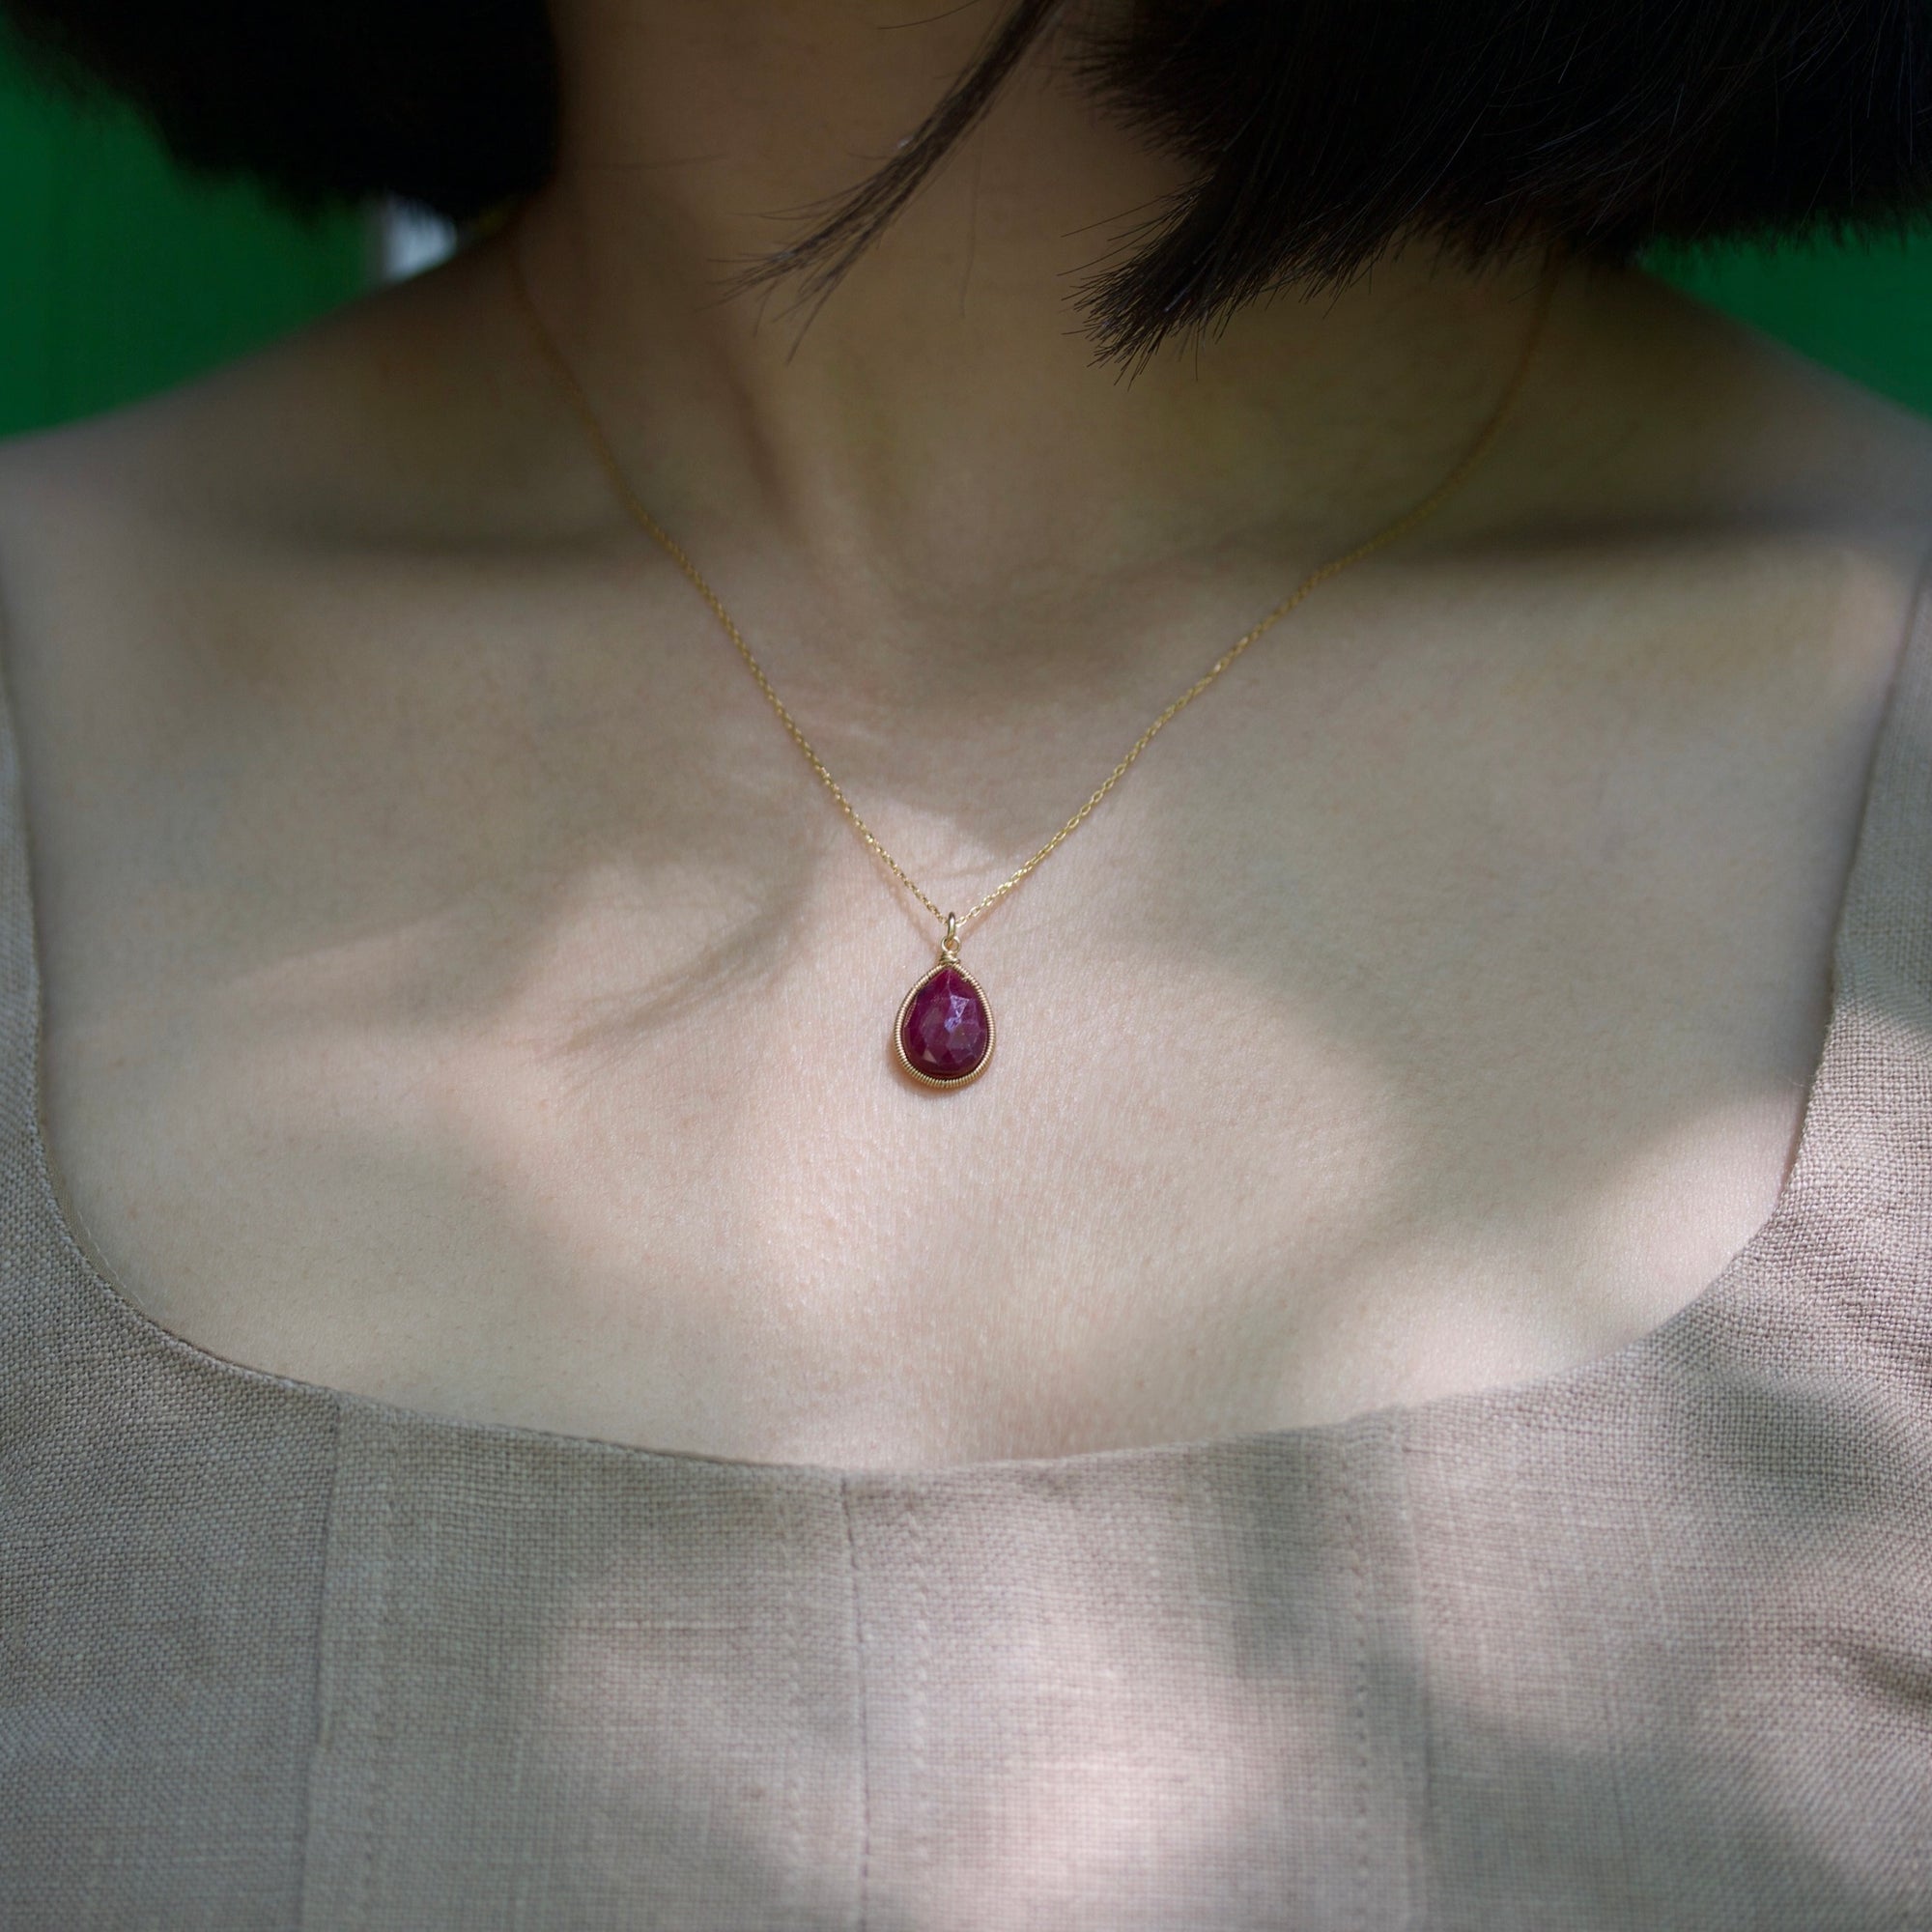 Lina - Ruby drop necklace